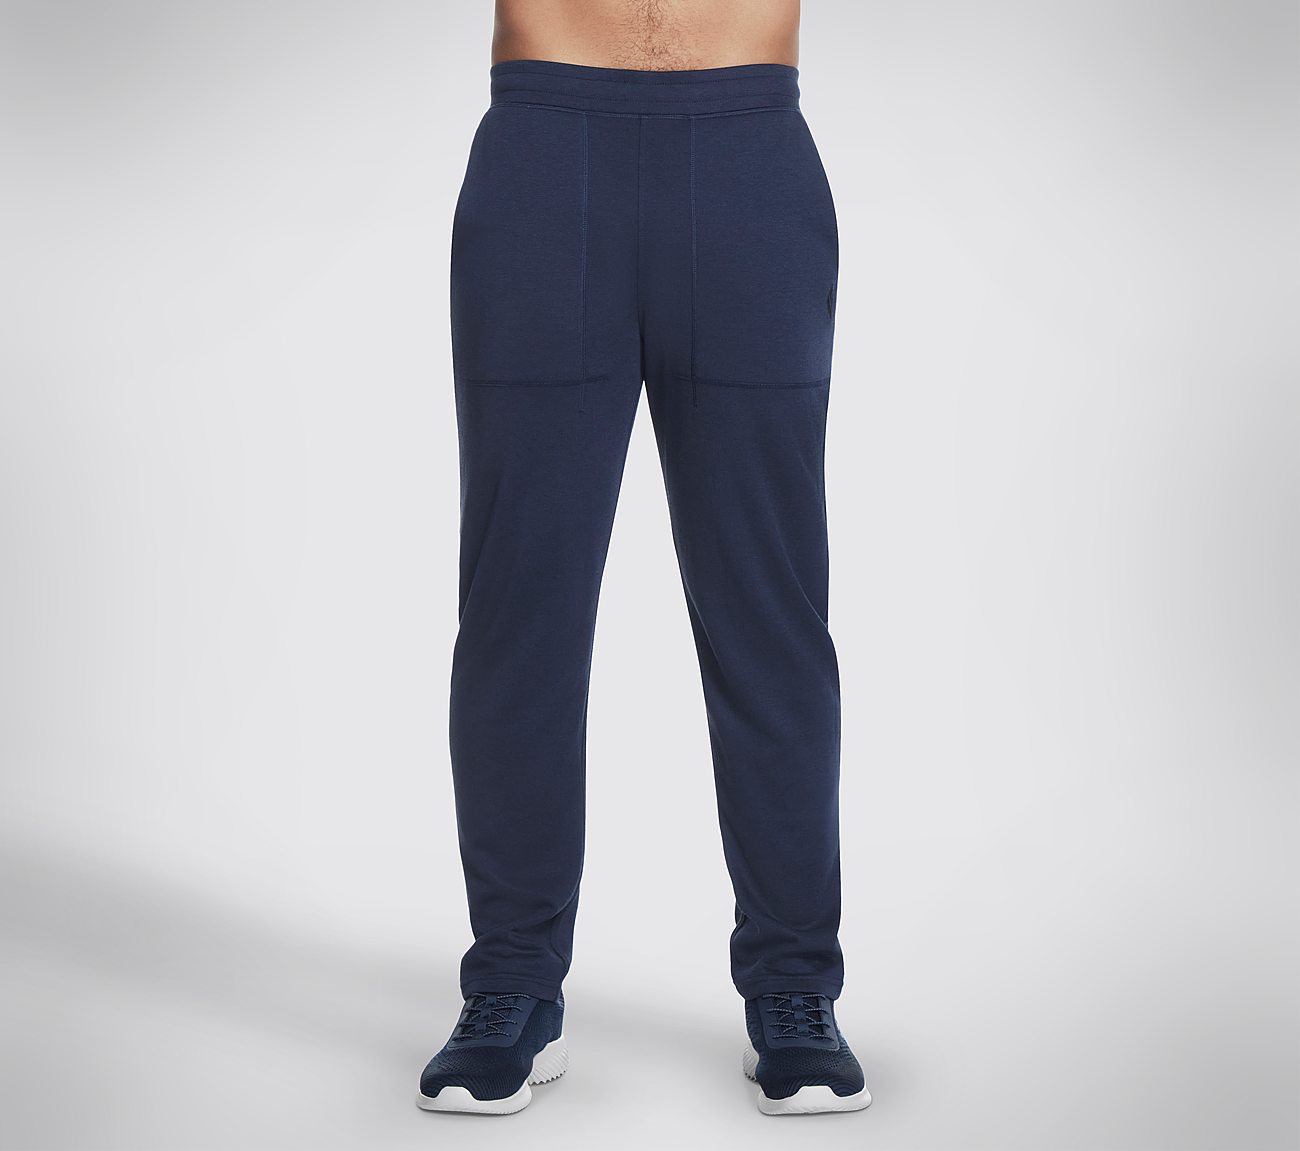 GOKNIT PIQUE LOUNGE PANT, NNNAVY Apparels Lateral View